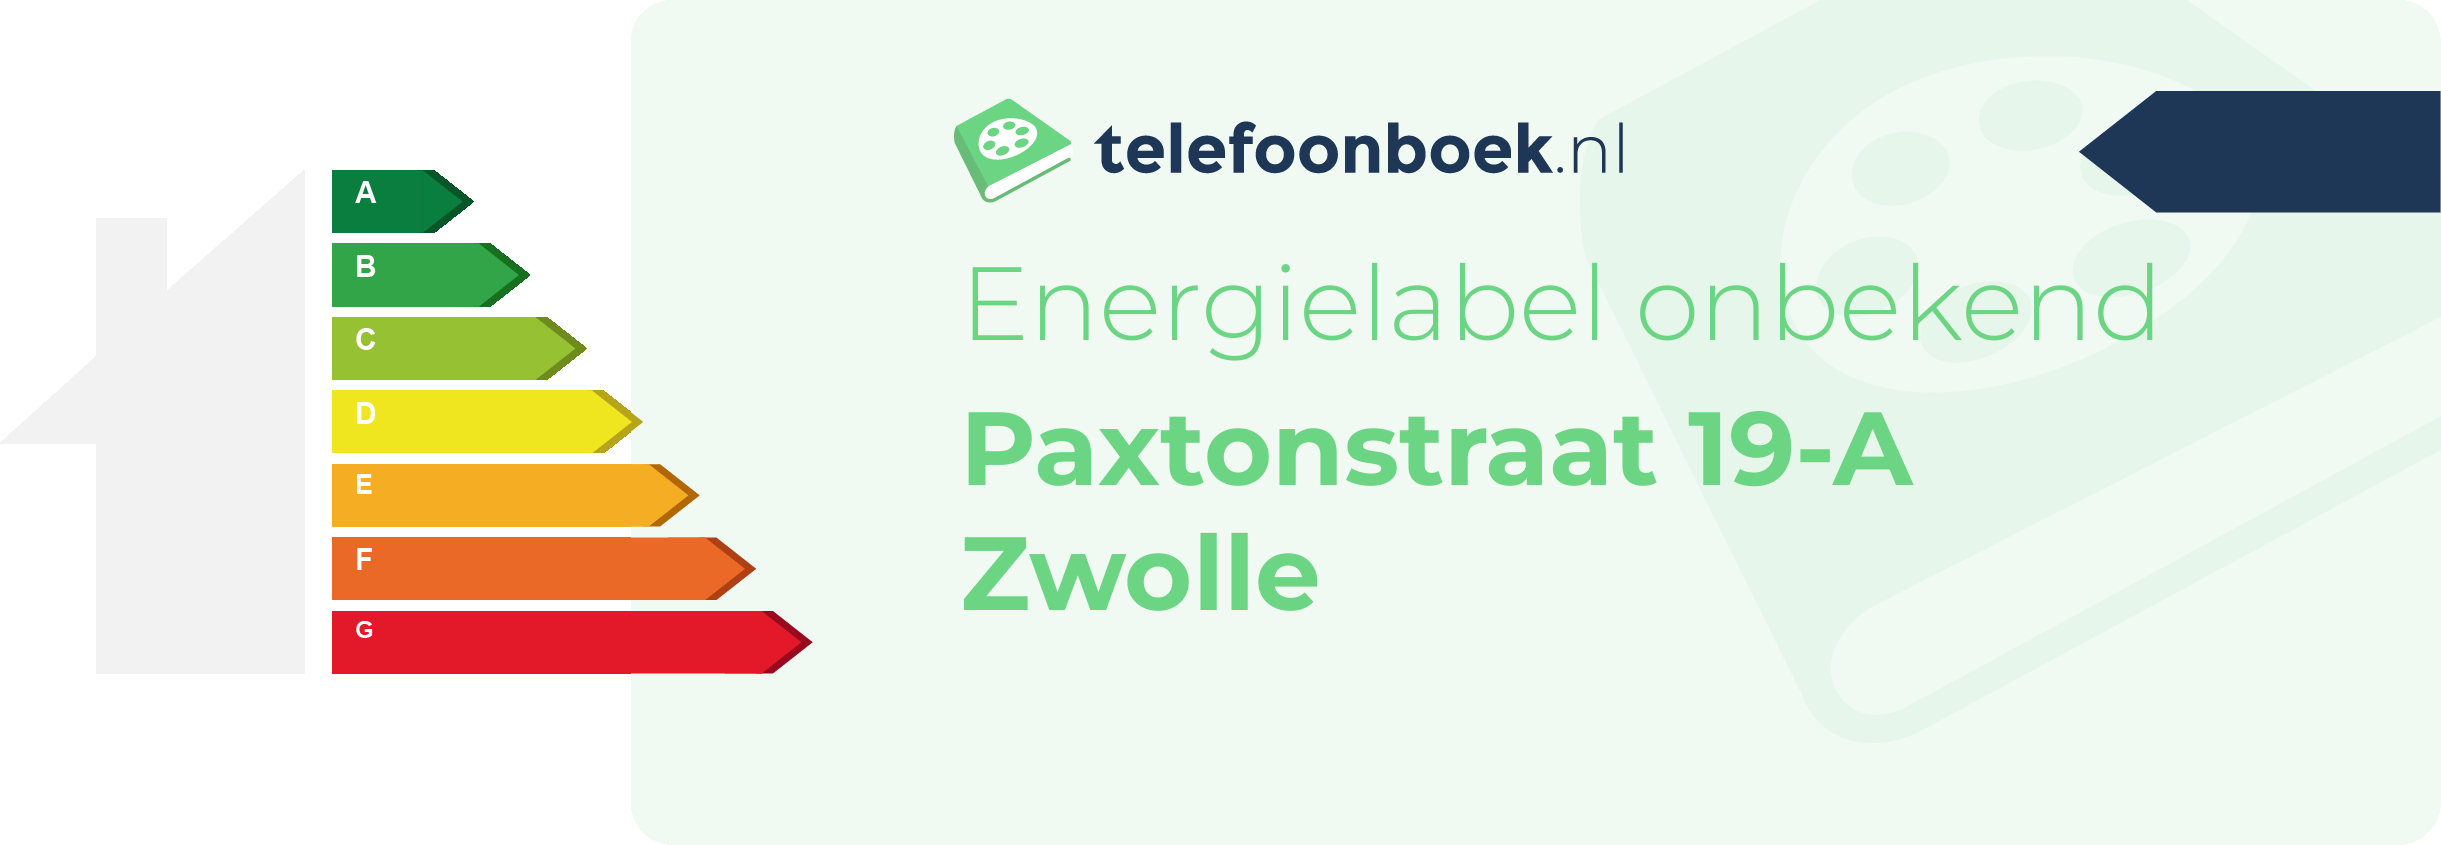 Energielabel Paxtonstraat 19-A Zwolle